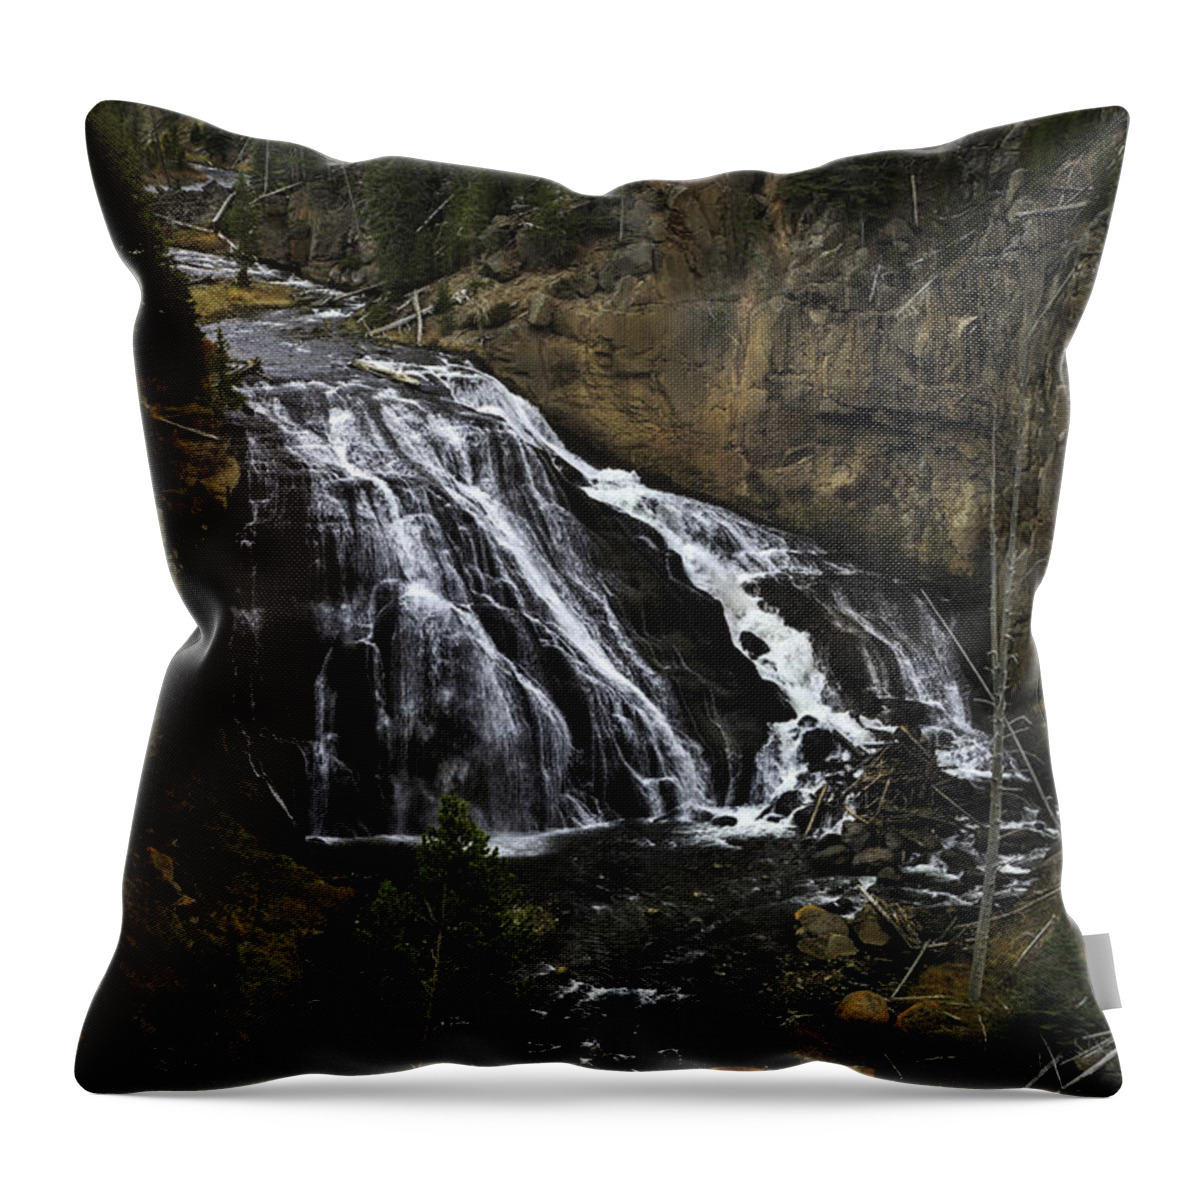 National Park Throw Pillow featuring the photograph Gibbons Falls, Yellowstone by Craig J Satterlee